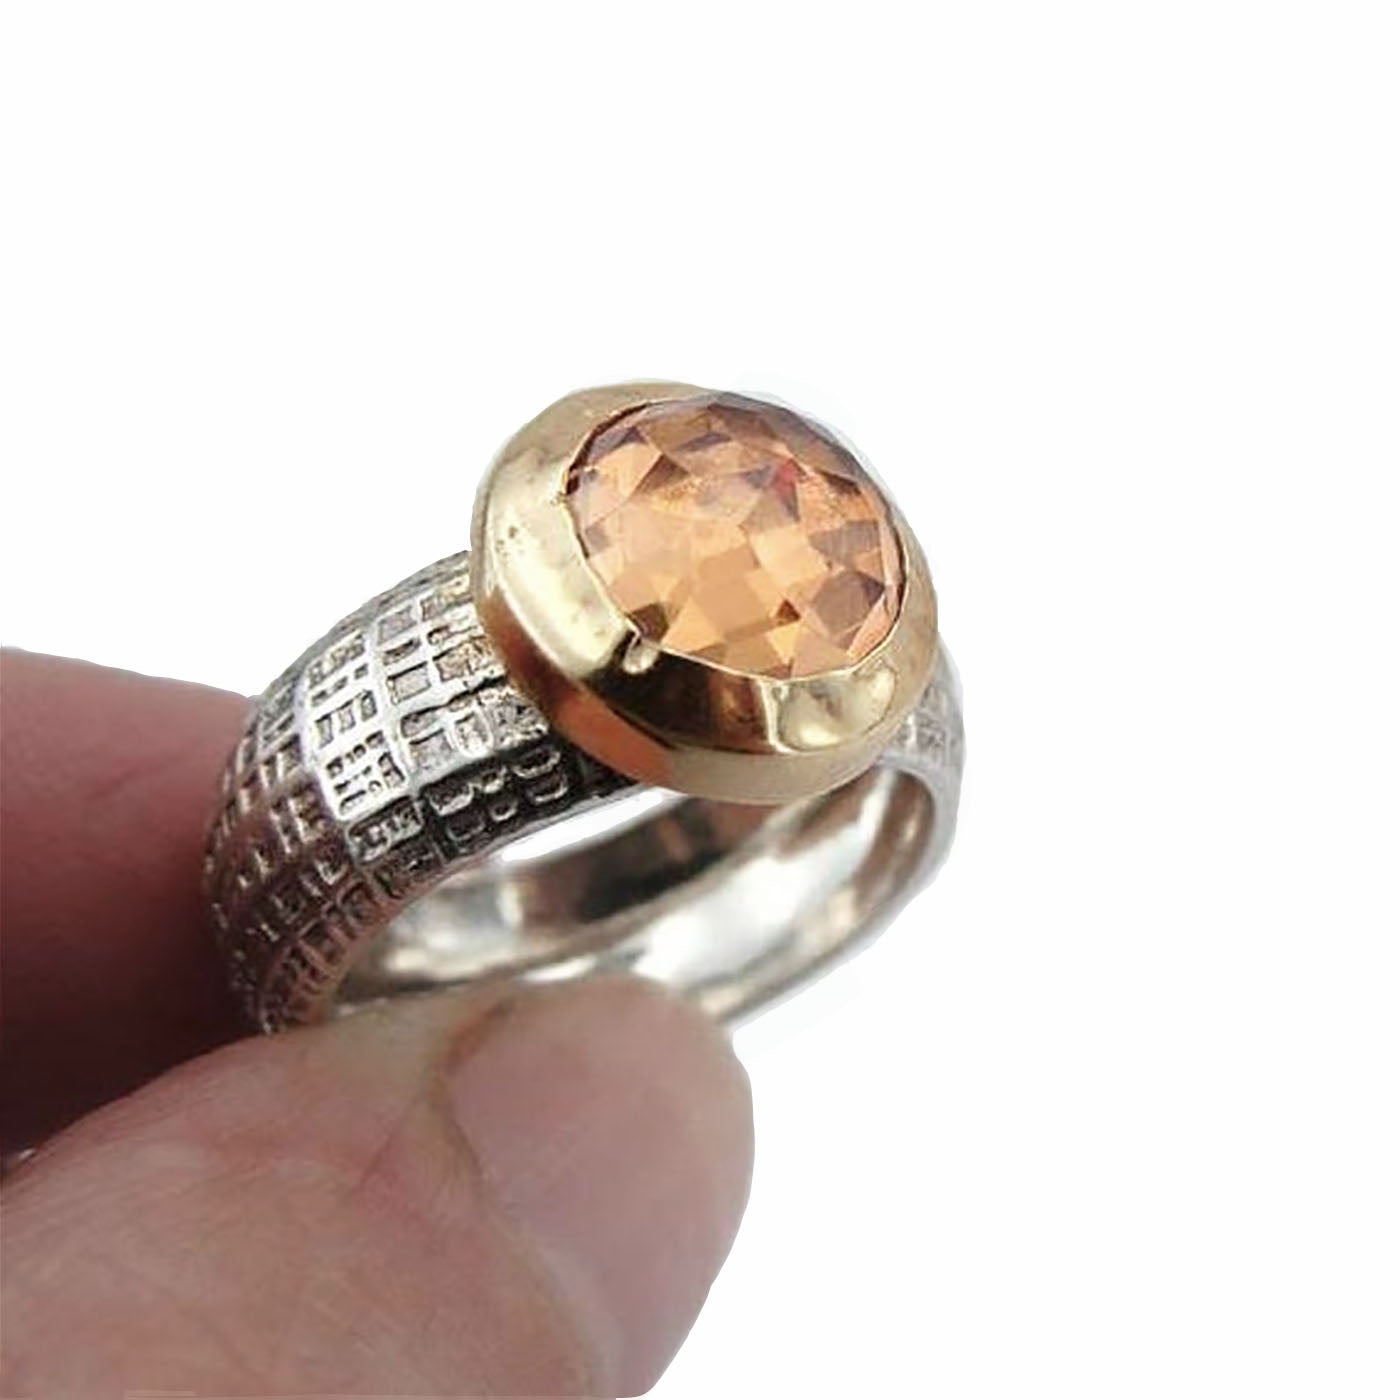 Champaign Ring 9K Gold Sterling Silver 925 Round Champaign Ring for Israeli Women Israeli Wife